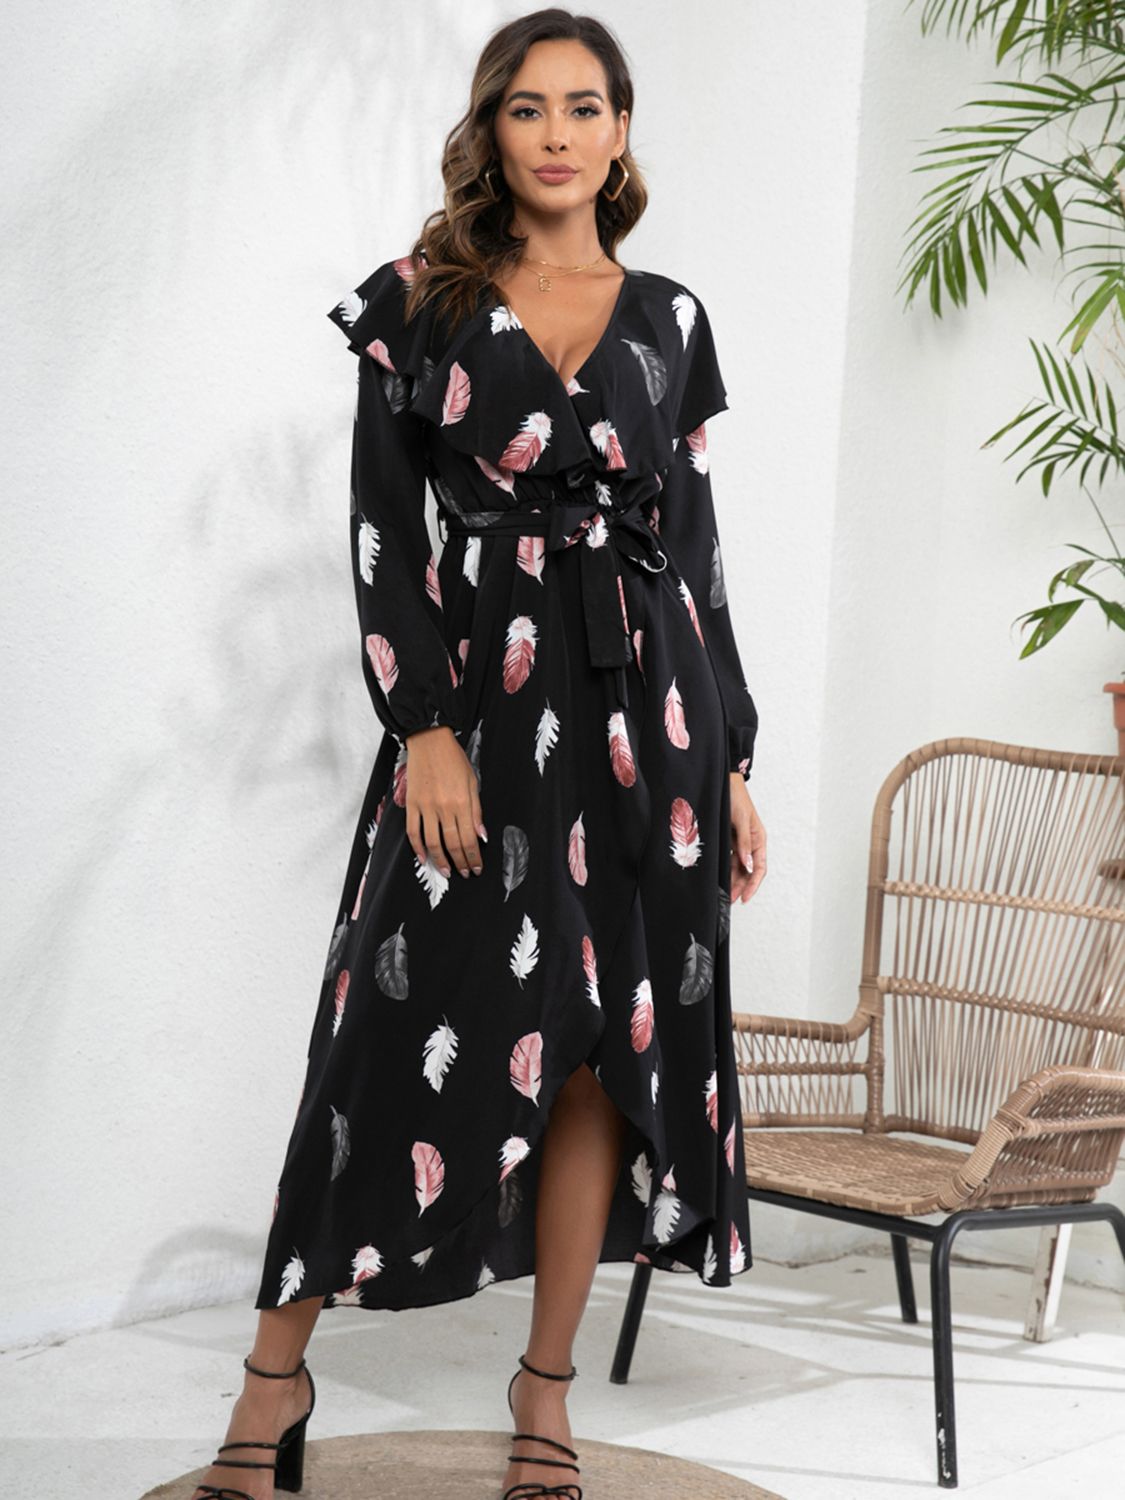 Long Sleeve Ruffle Trim Dress for Women Over 50 - Ideal Summer Beach Wedding Guest Party Outfit, Printed Tie Front